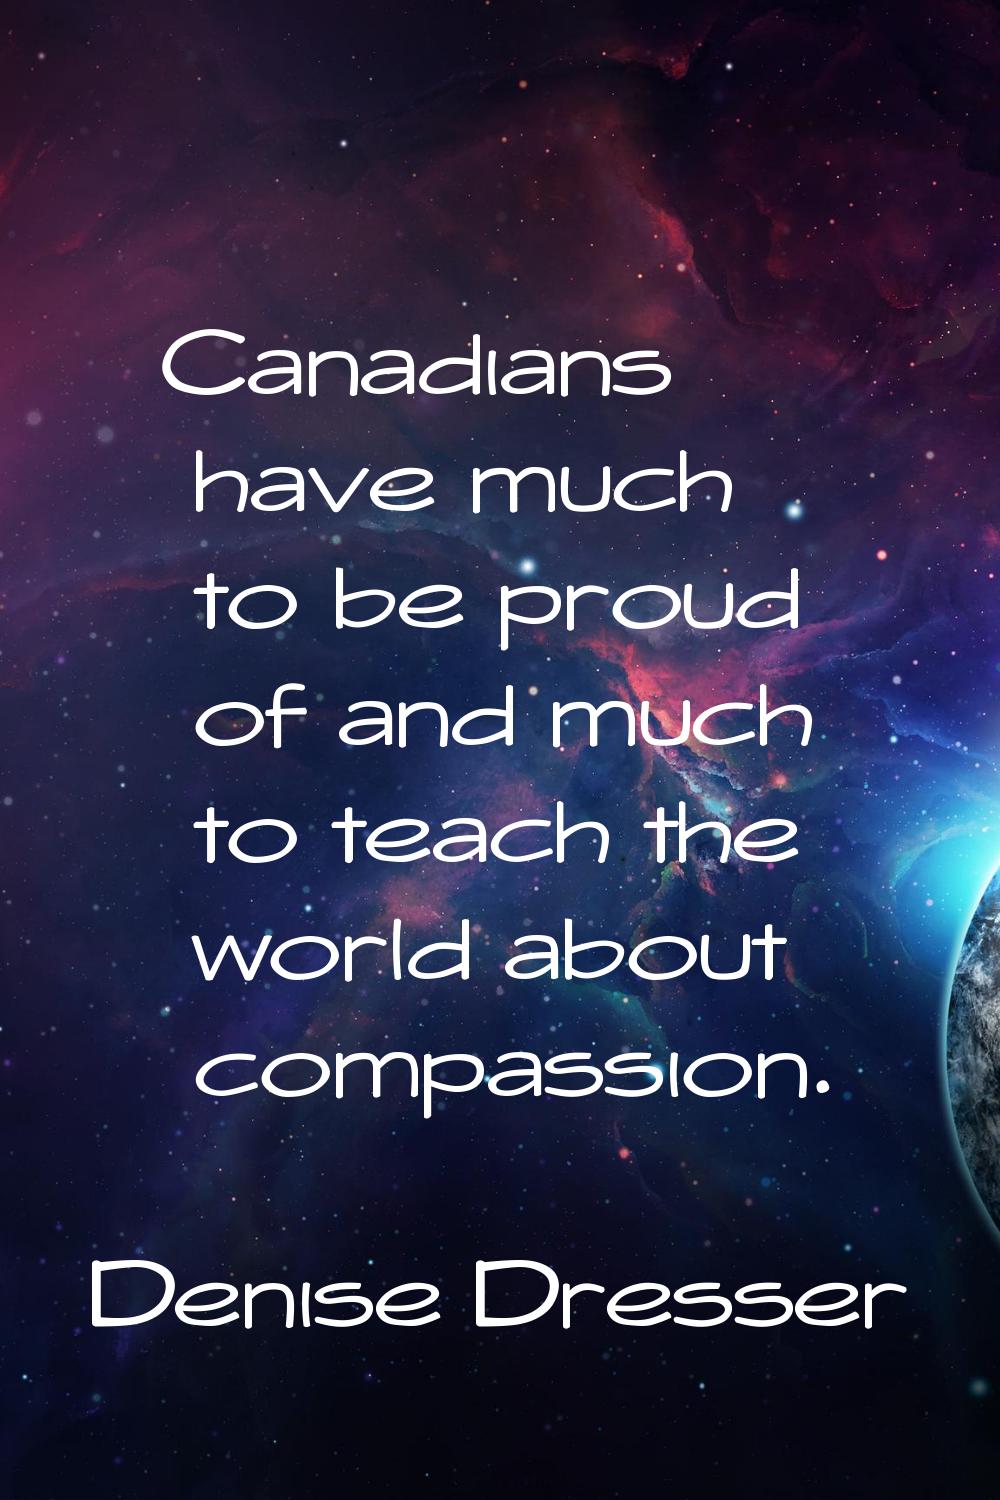 Canadians have much to be proud of and much to teach the world about compassion.